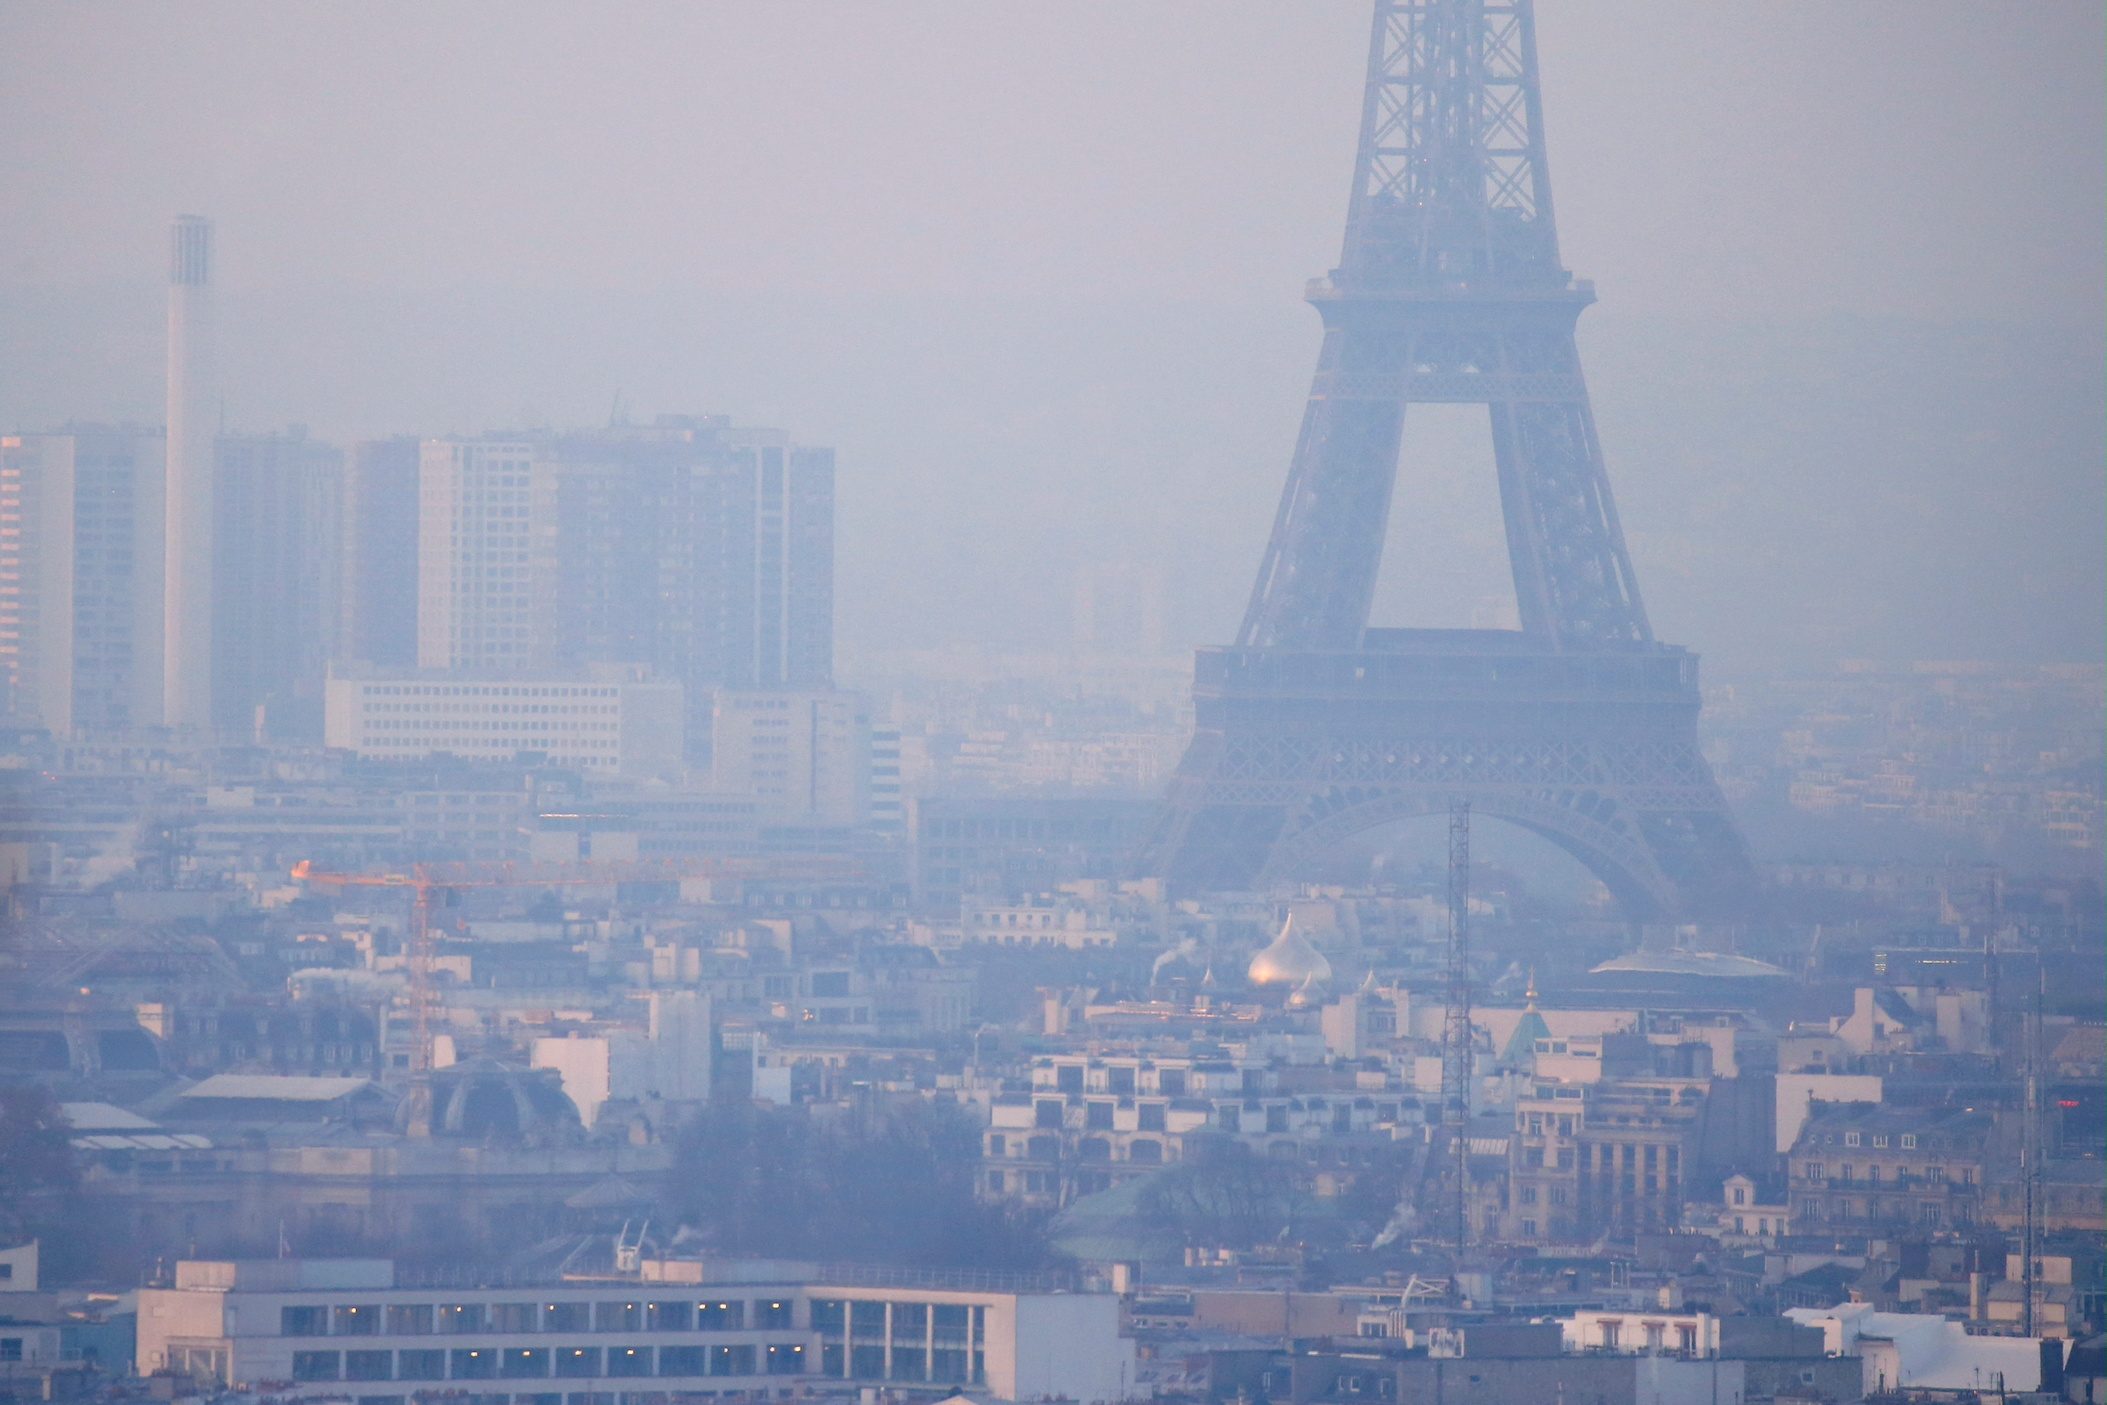 Air quality improved slightly in 2020 during lockdowns, United Nations agency says